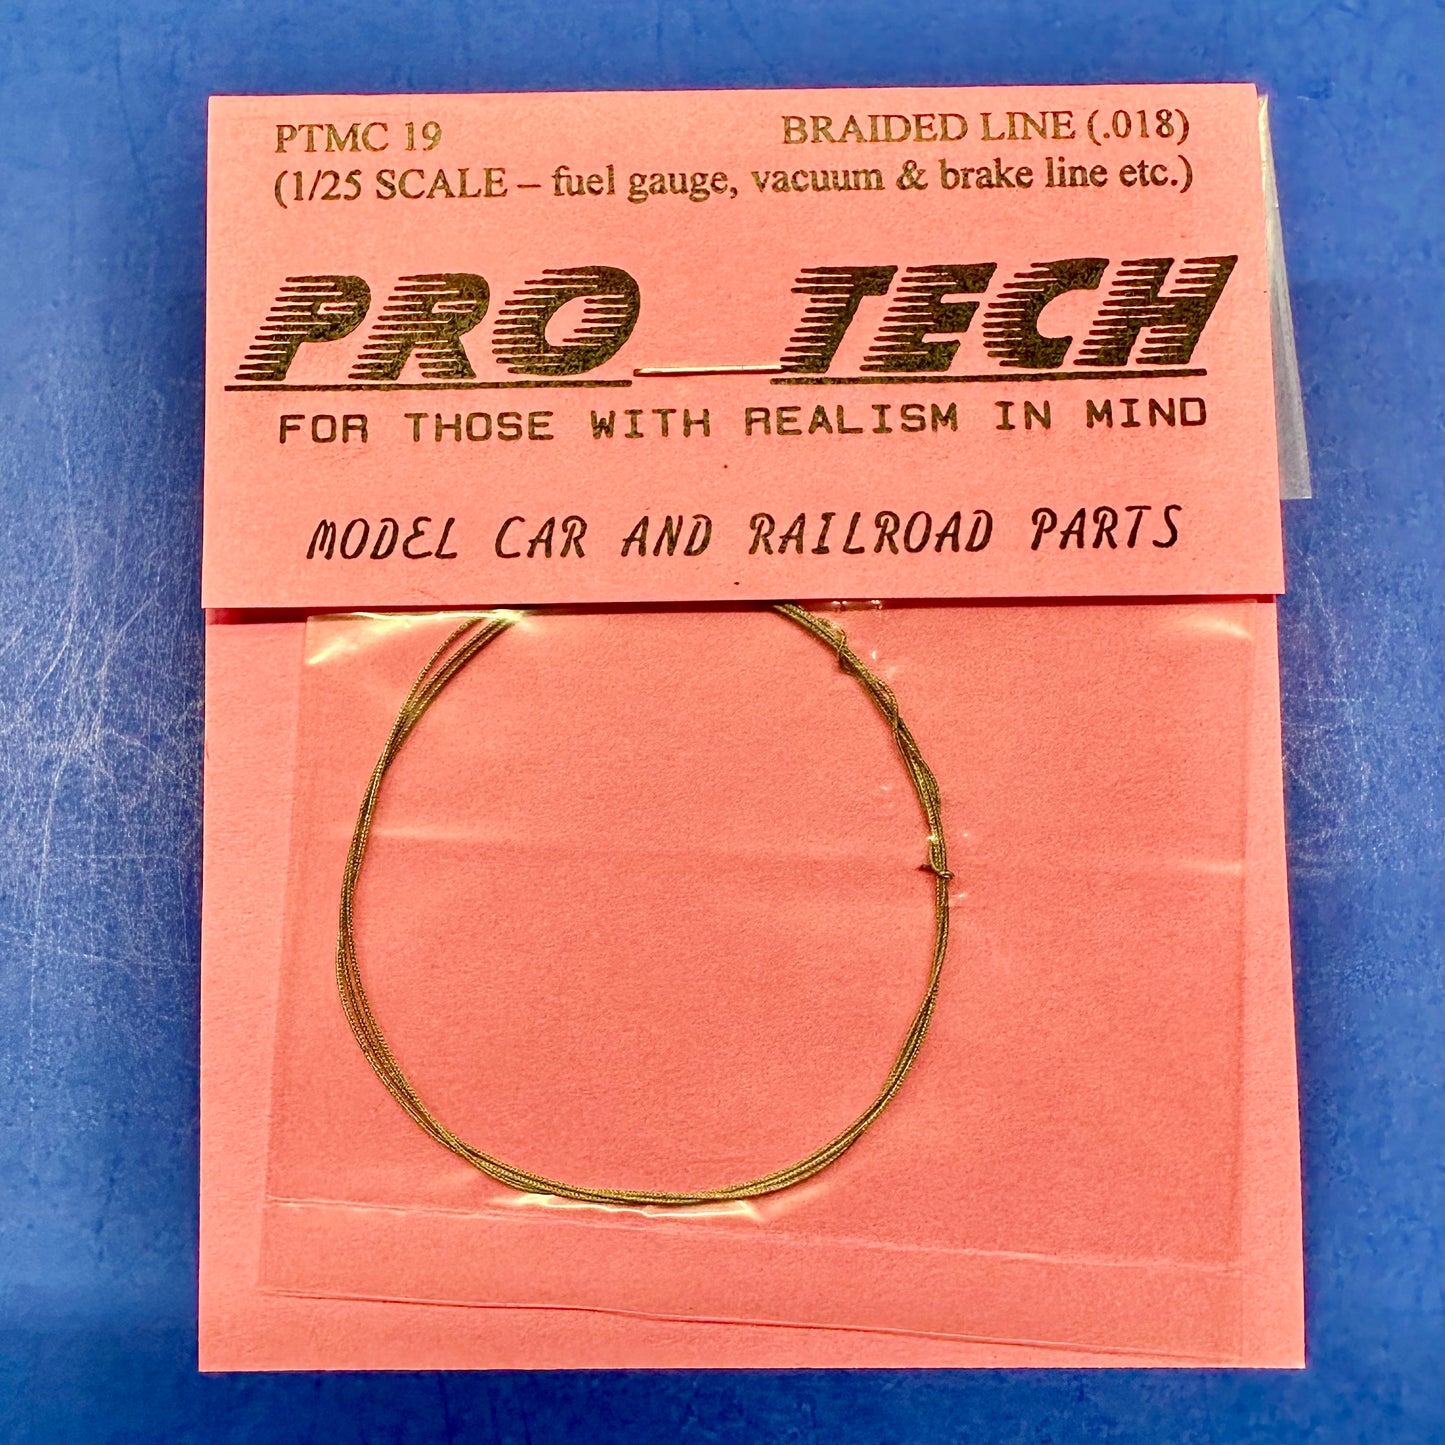 Braided Line 1/25 by Pro Tech